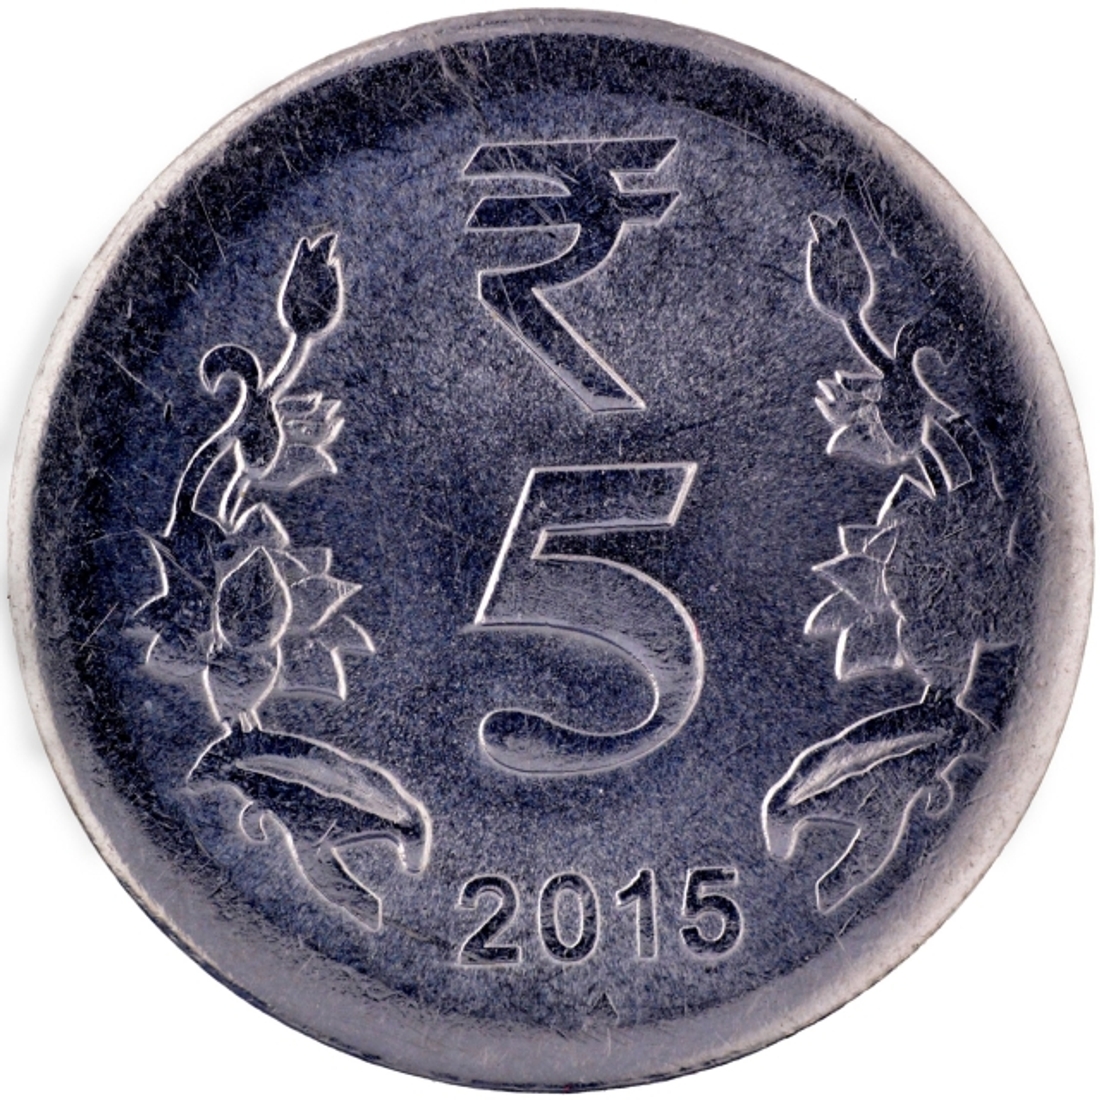 UNC Stainless Steel Five Rupees Coin of Republic India of 2015.